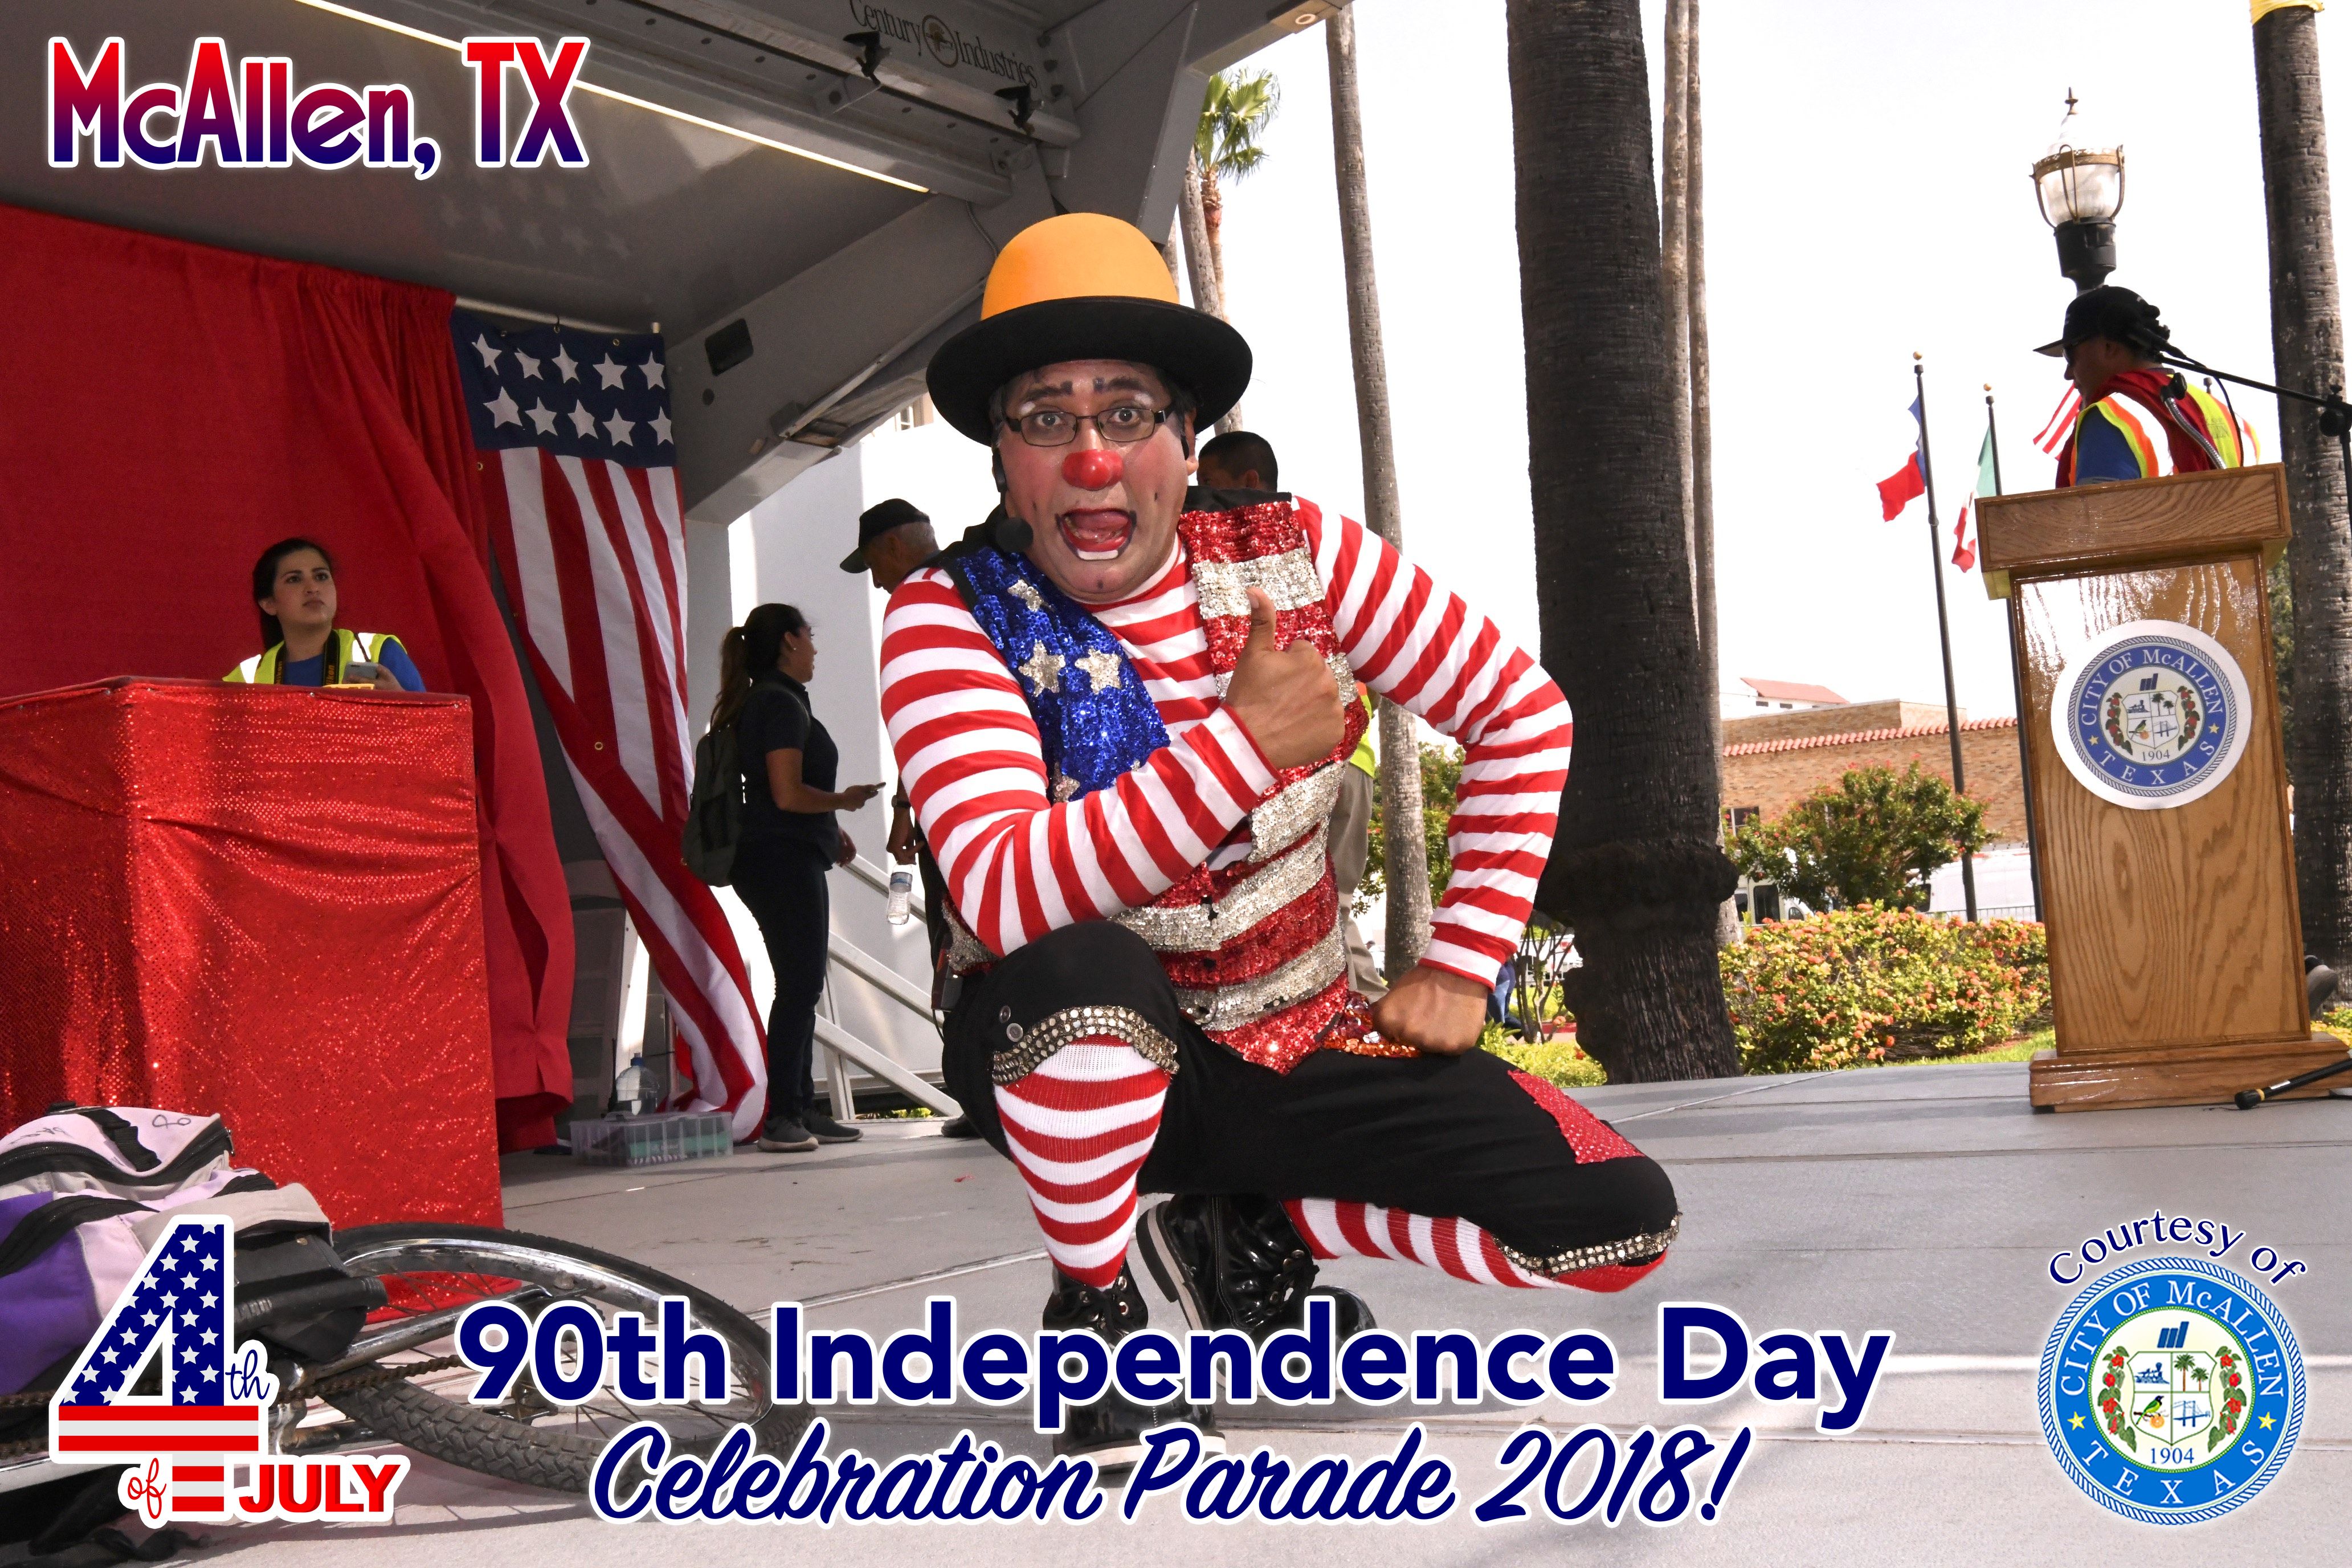 90th McAllen 4th of July Celebration Parade 2018 – Clowns